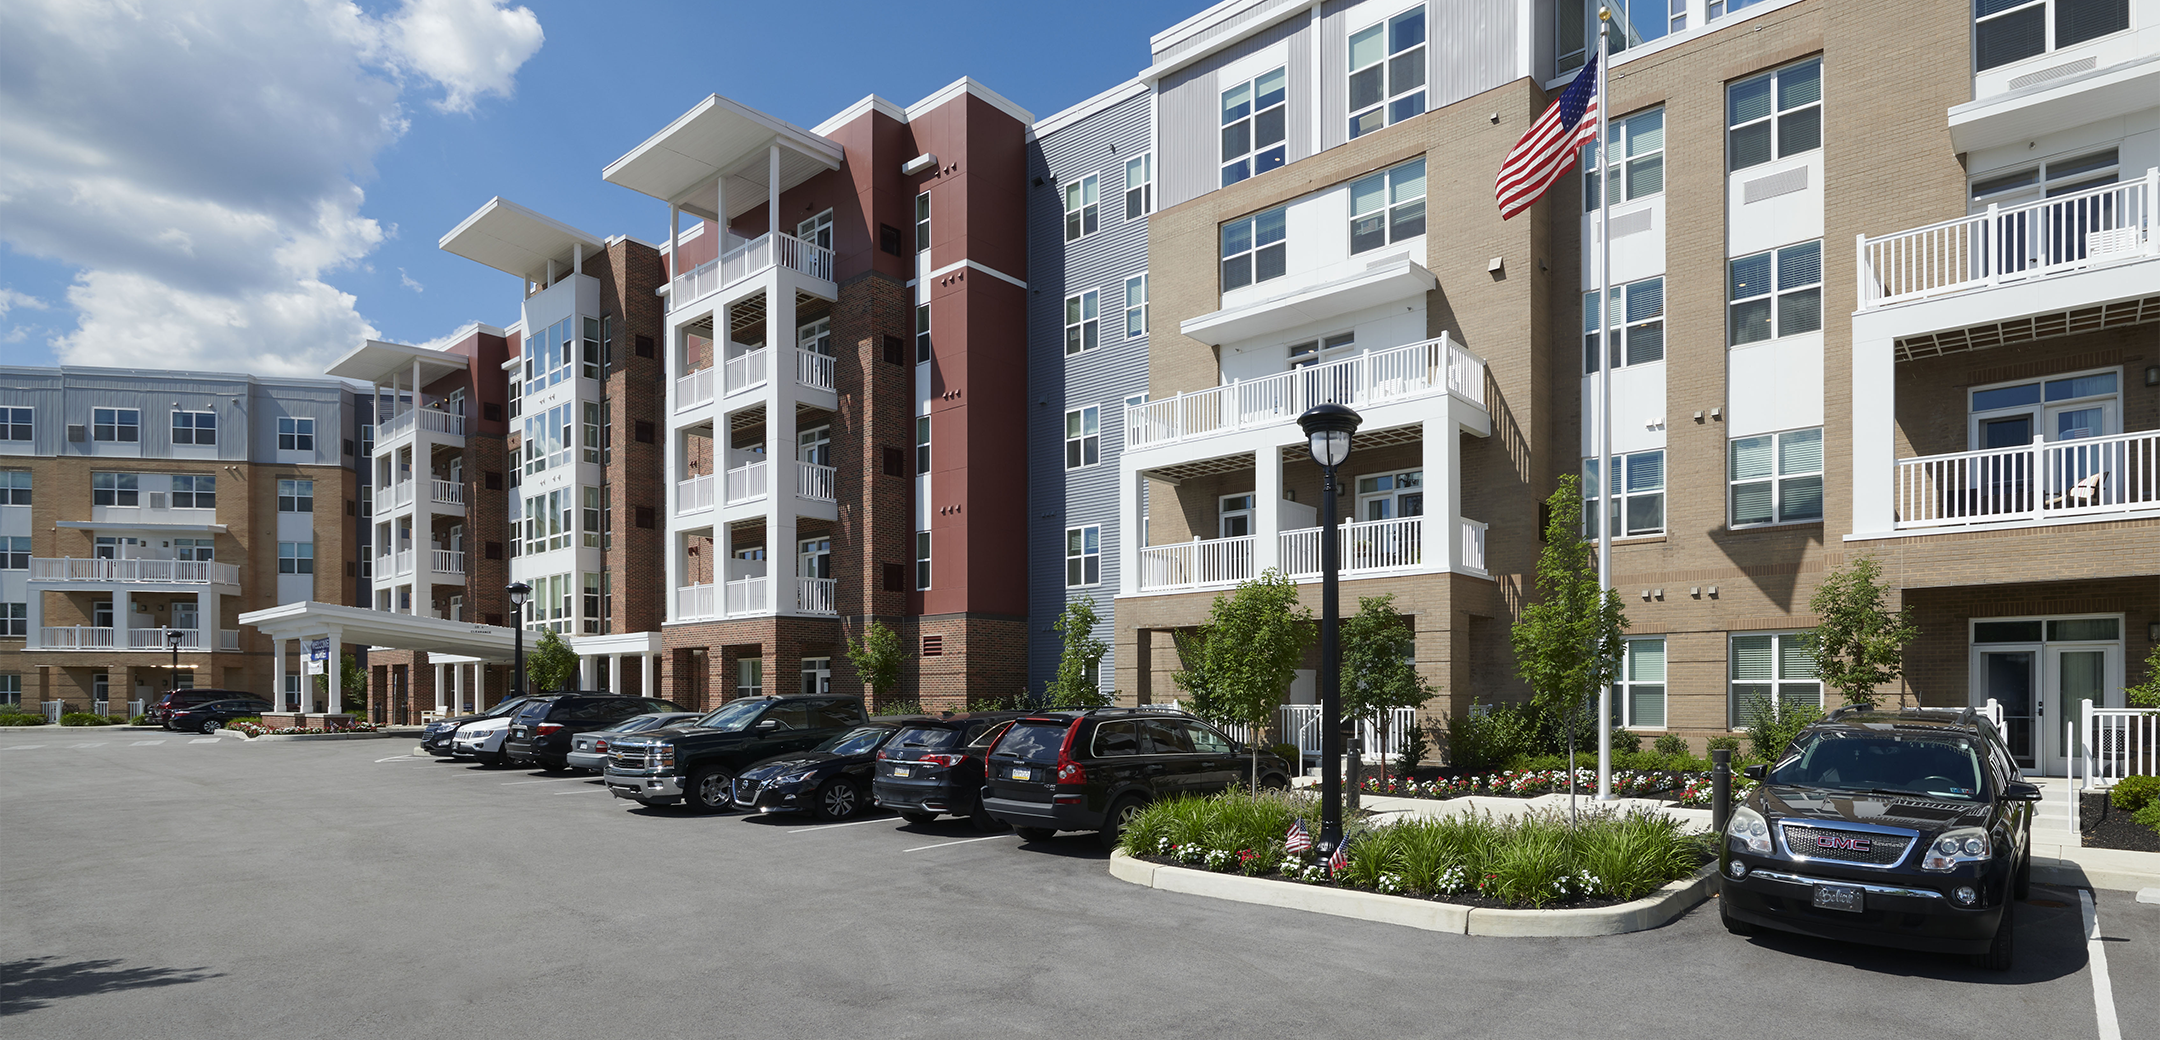 An exterior view of the Brightview Devon mixed brick and panel building showcasing the white accented windows and balconies with a front parking lot.